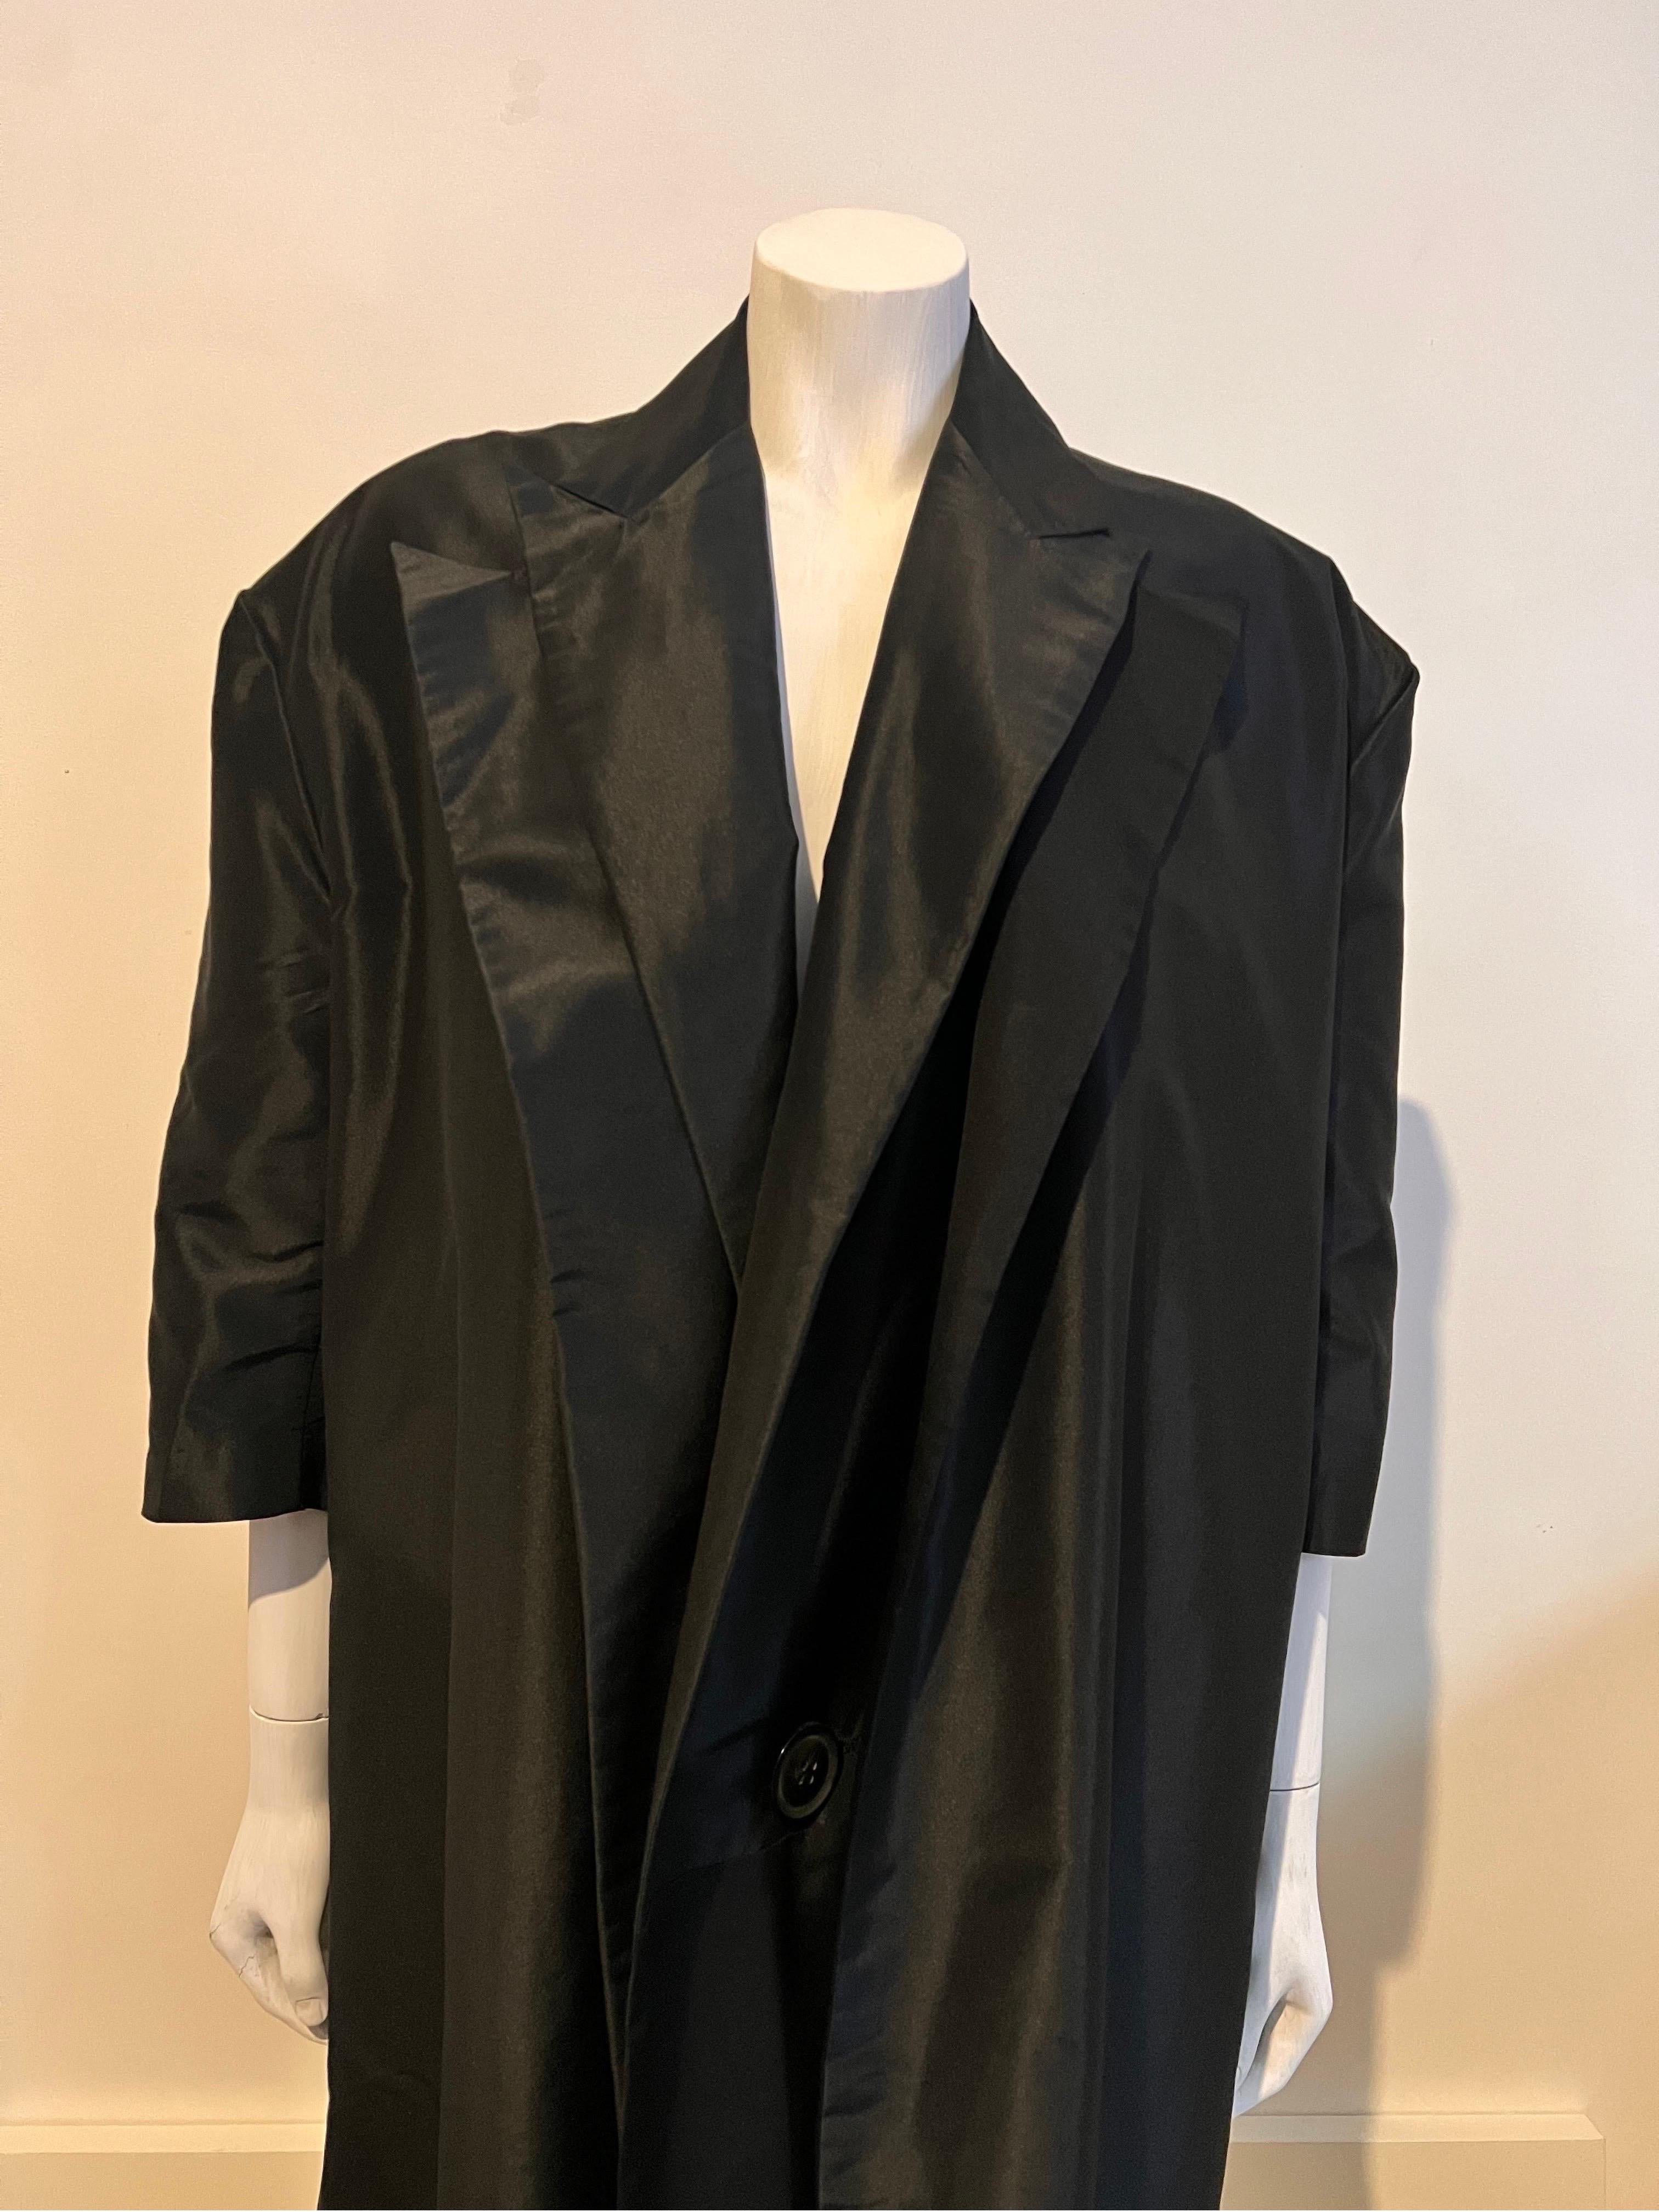 A very chic oversized vintage 1990's Yohji Yamamoto evening coat with a very unique cut and  shape.

The piece is cut double the length of the garment and turned back on it self with the finished coat showing a double layer of the lapels at the